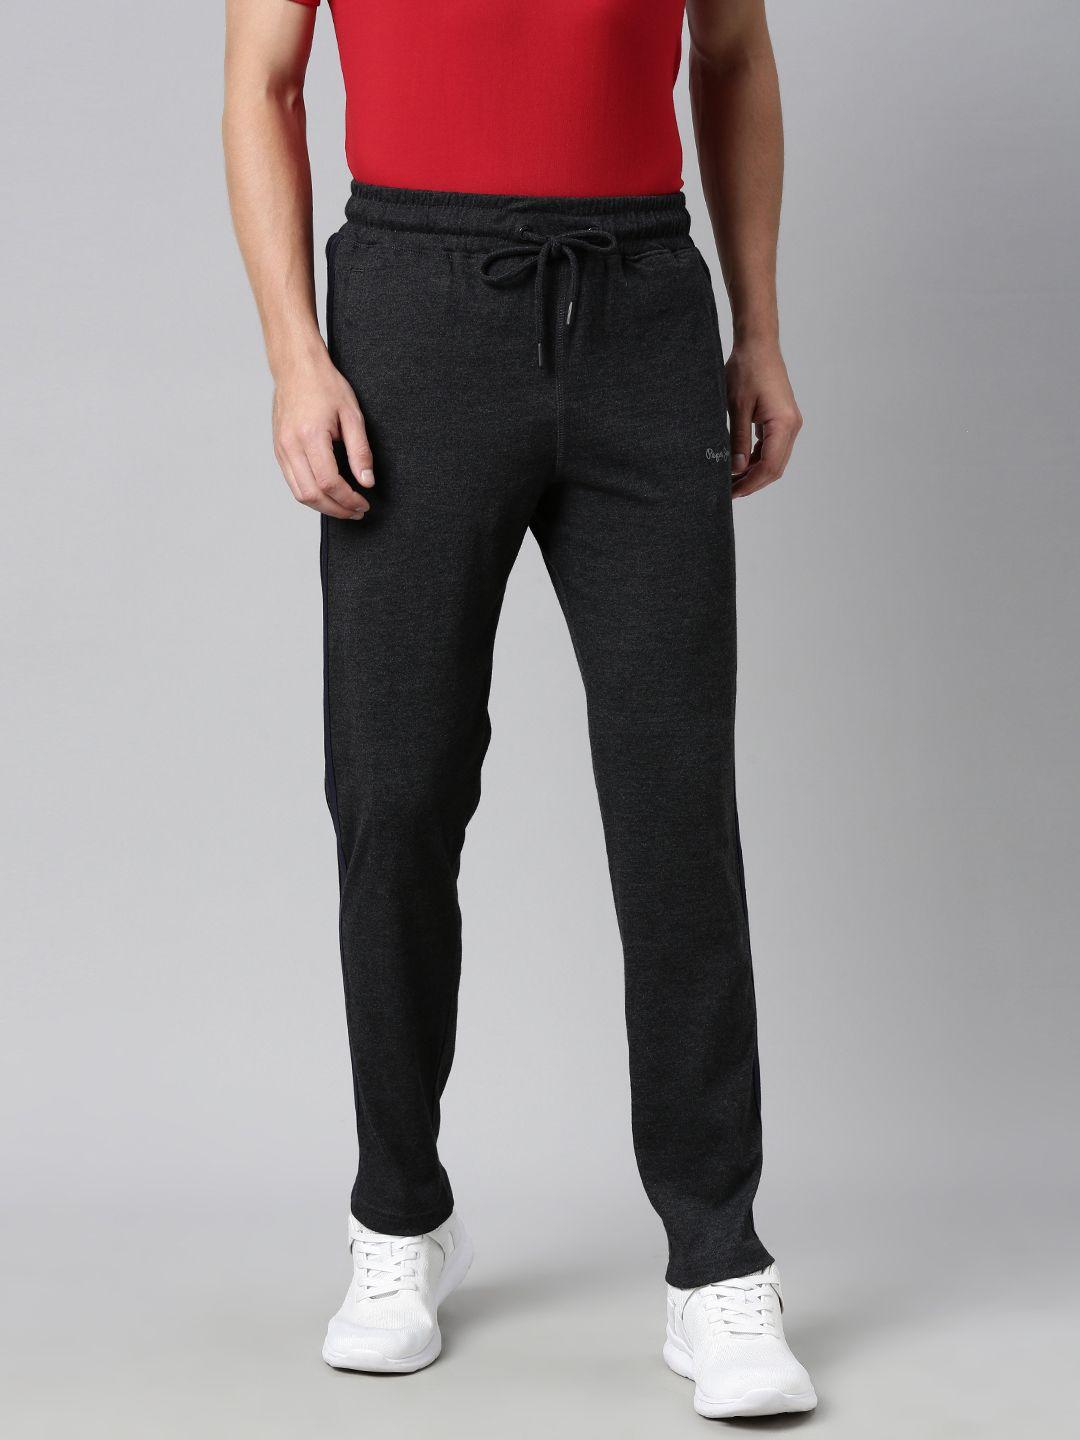 pepe jeans men charcoal grey solid track pants